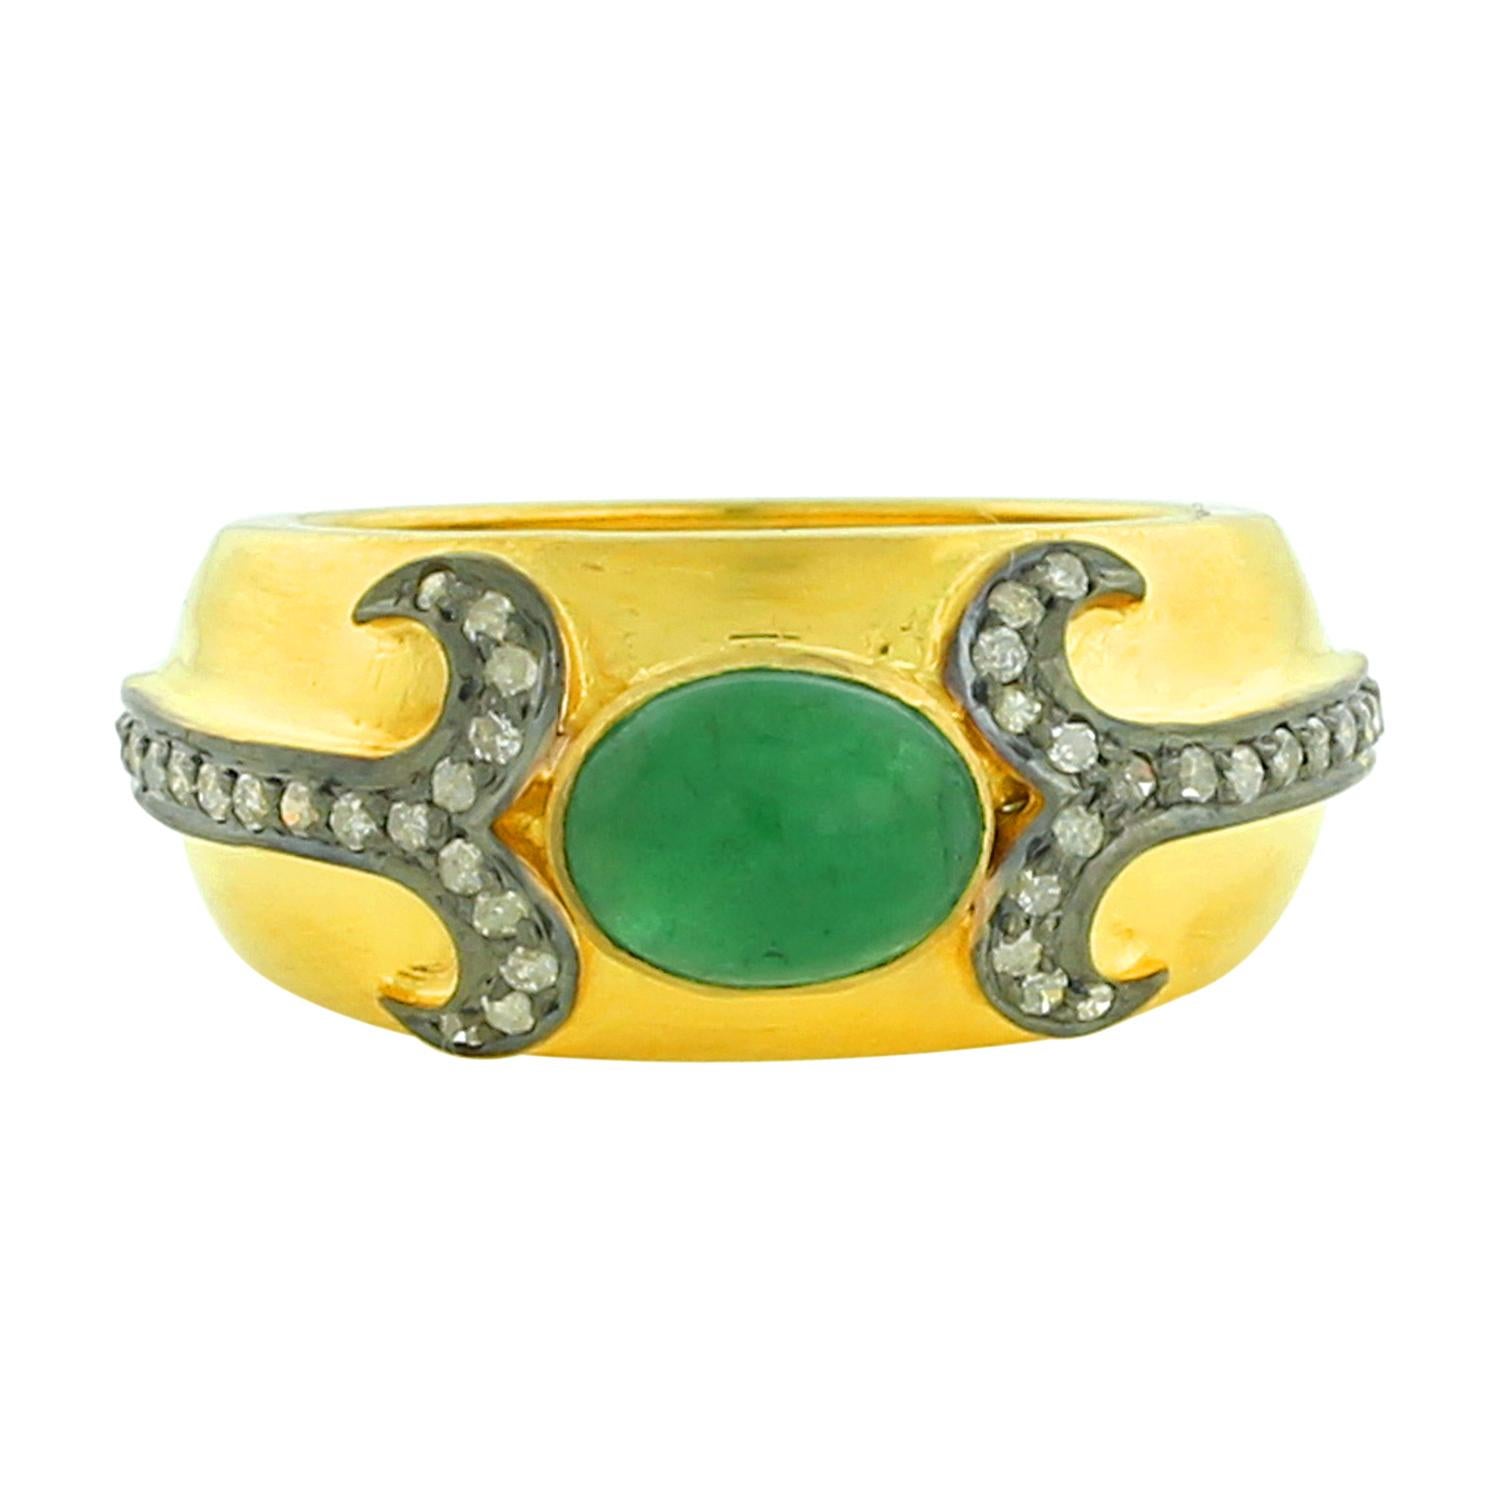 Mixed Cut Center Stone Emerald Ring With Diamonds Made In 18k Yellow Gold For Sale